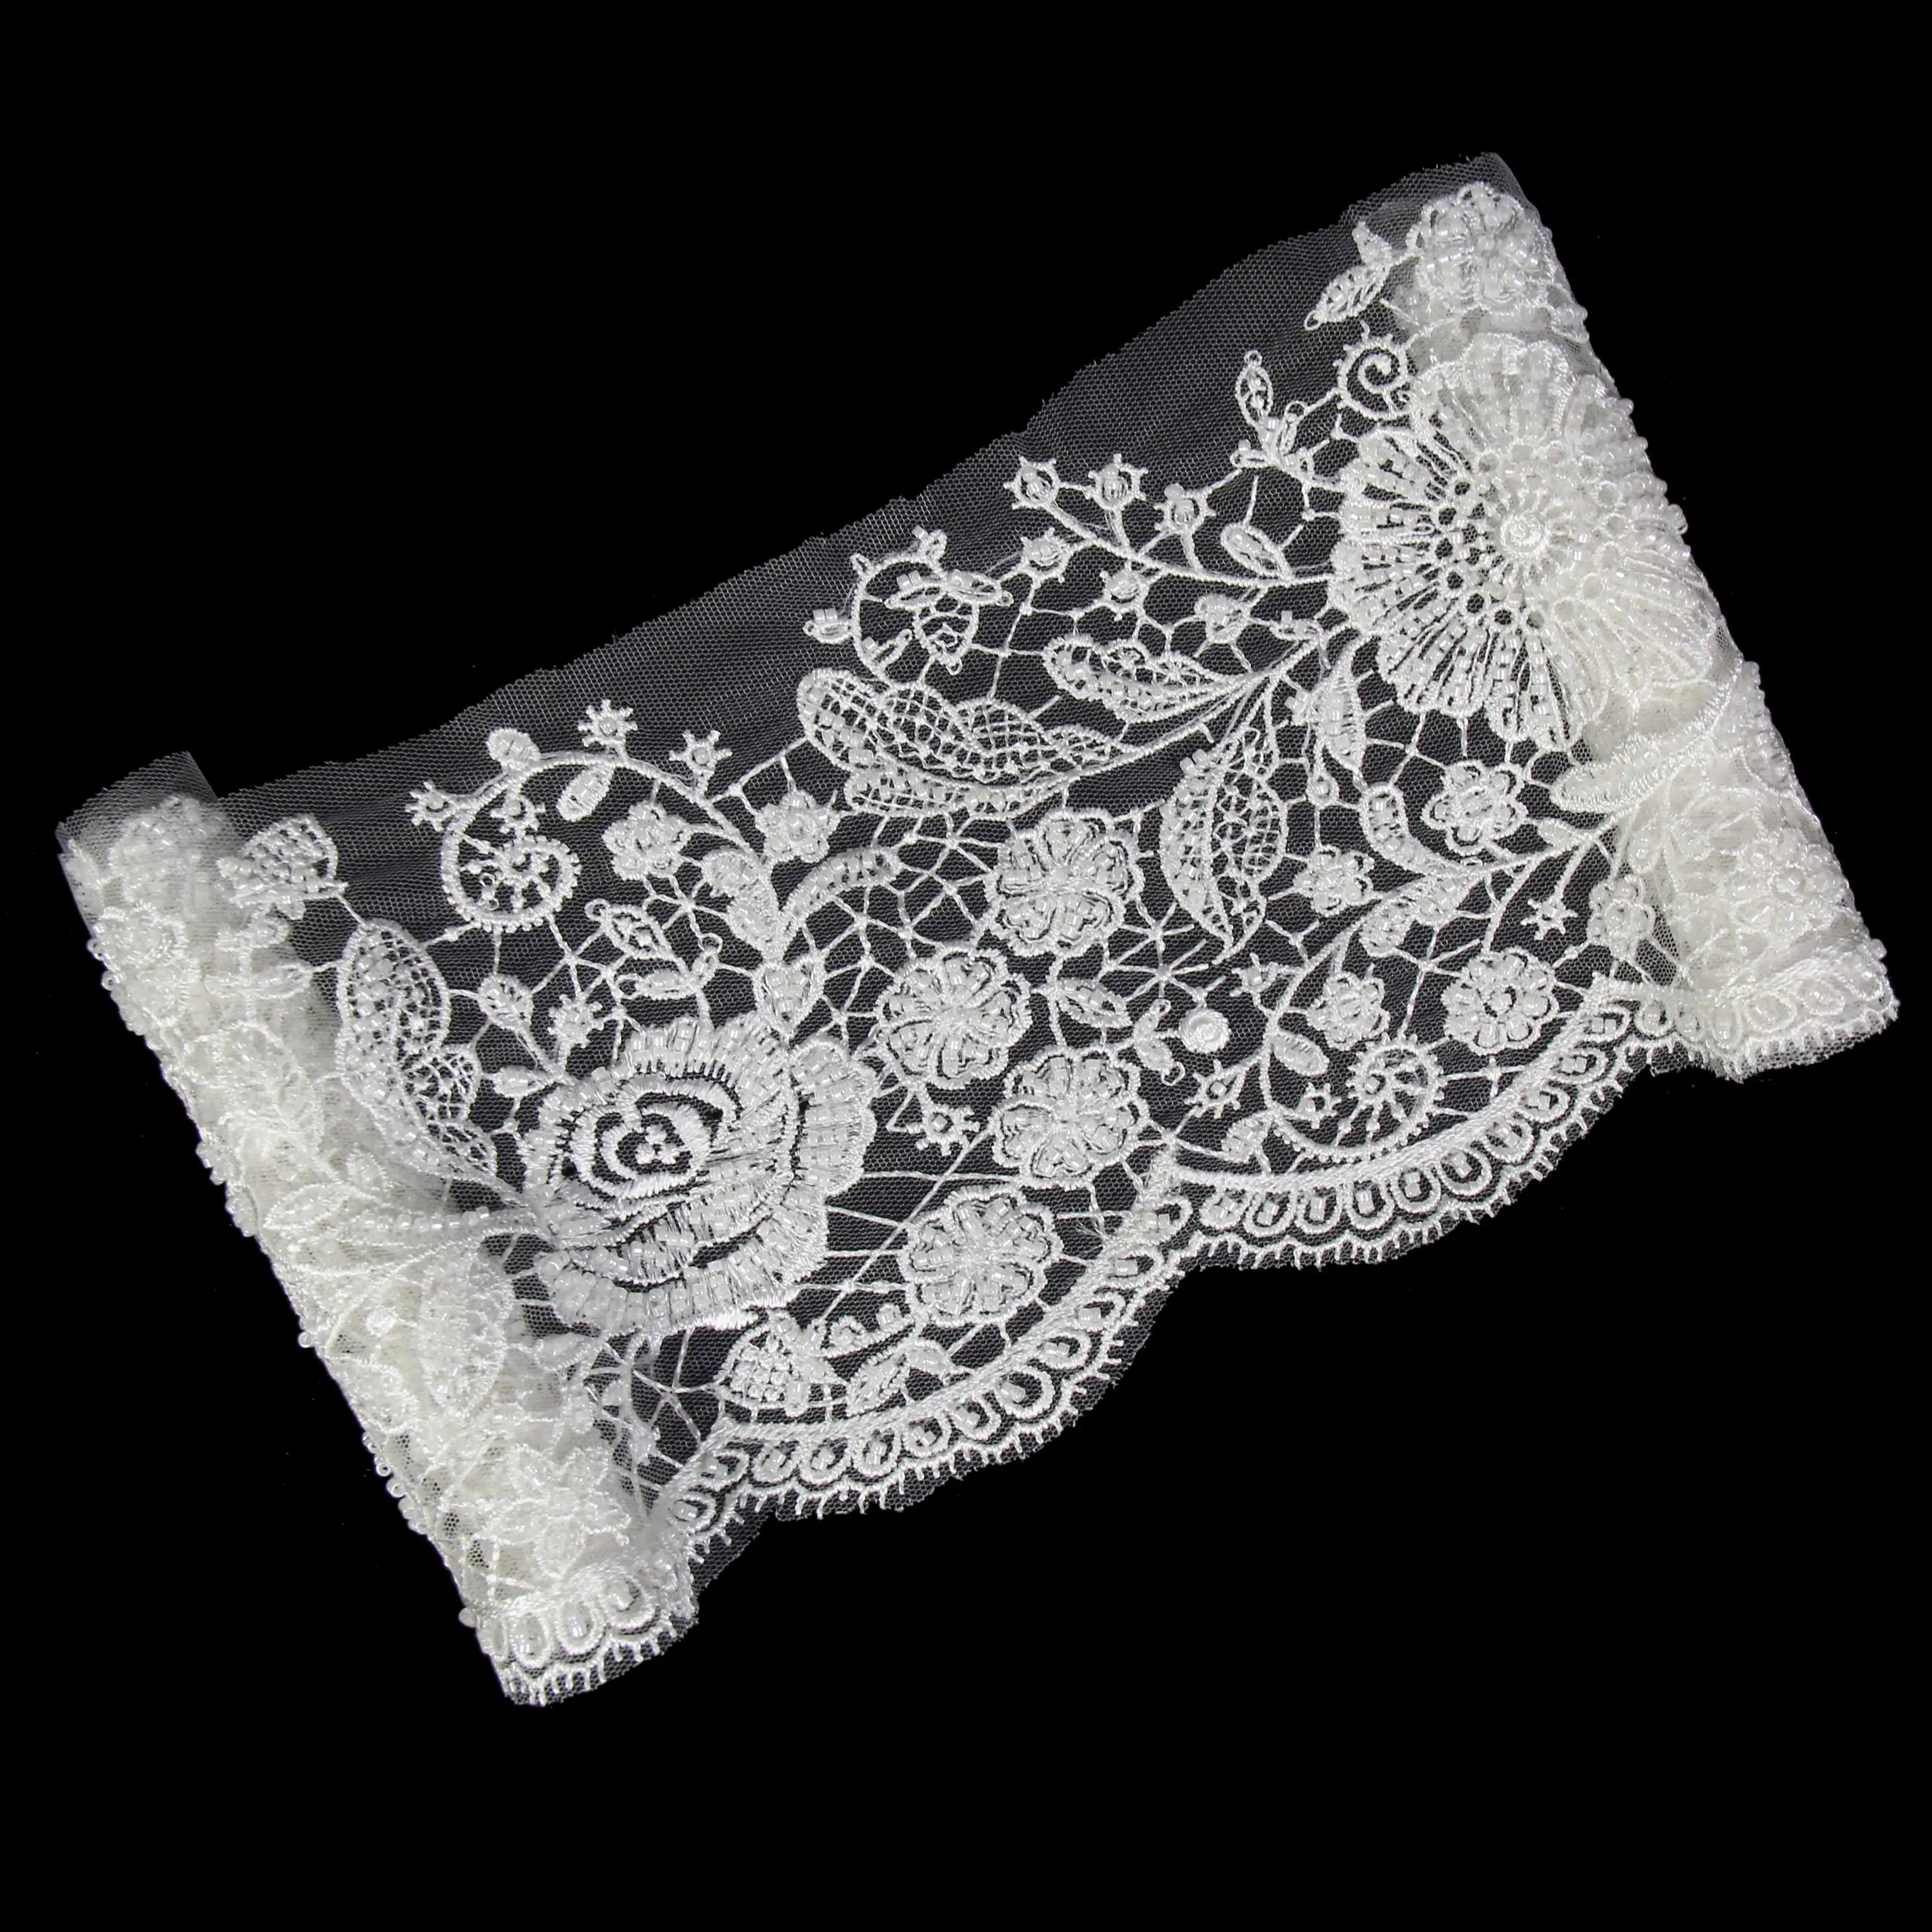 High quality pure white lace trim veil with beads and sequins, used for displaying elegance in headdresses